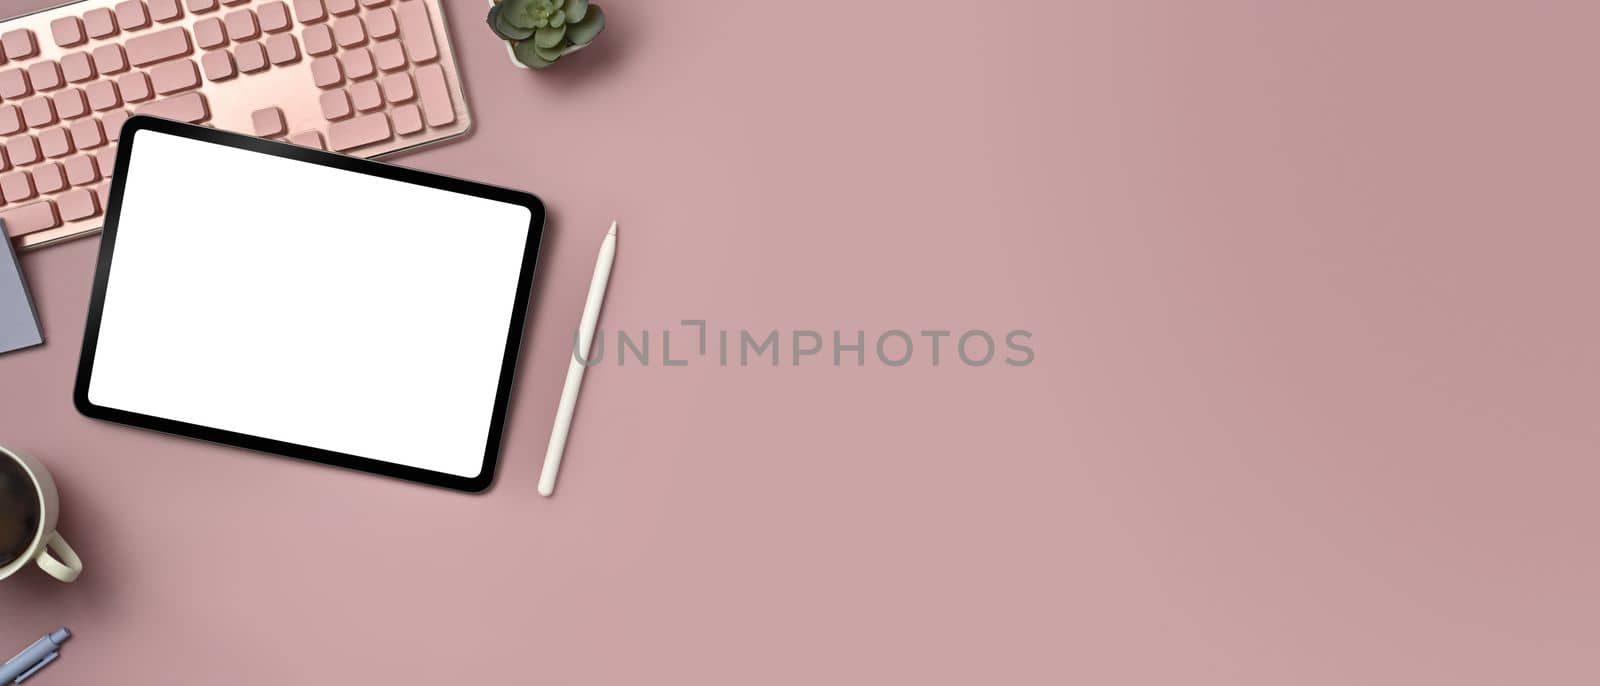 Digital tablet, keyboard, coffee cup and potted plant on pink background. Copy space for text information or content by prathanchorruangsak